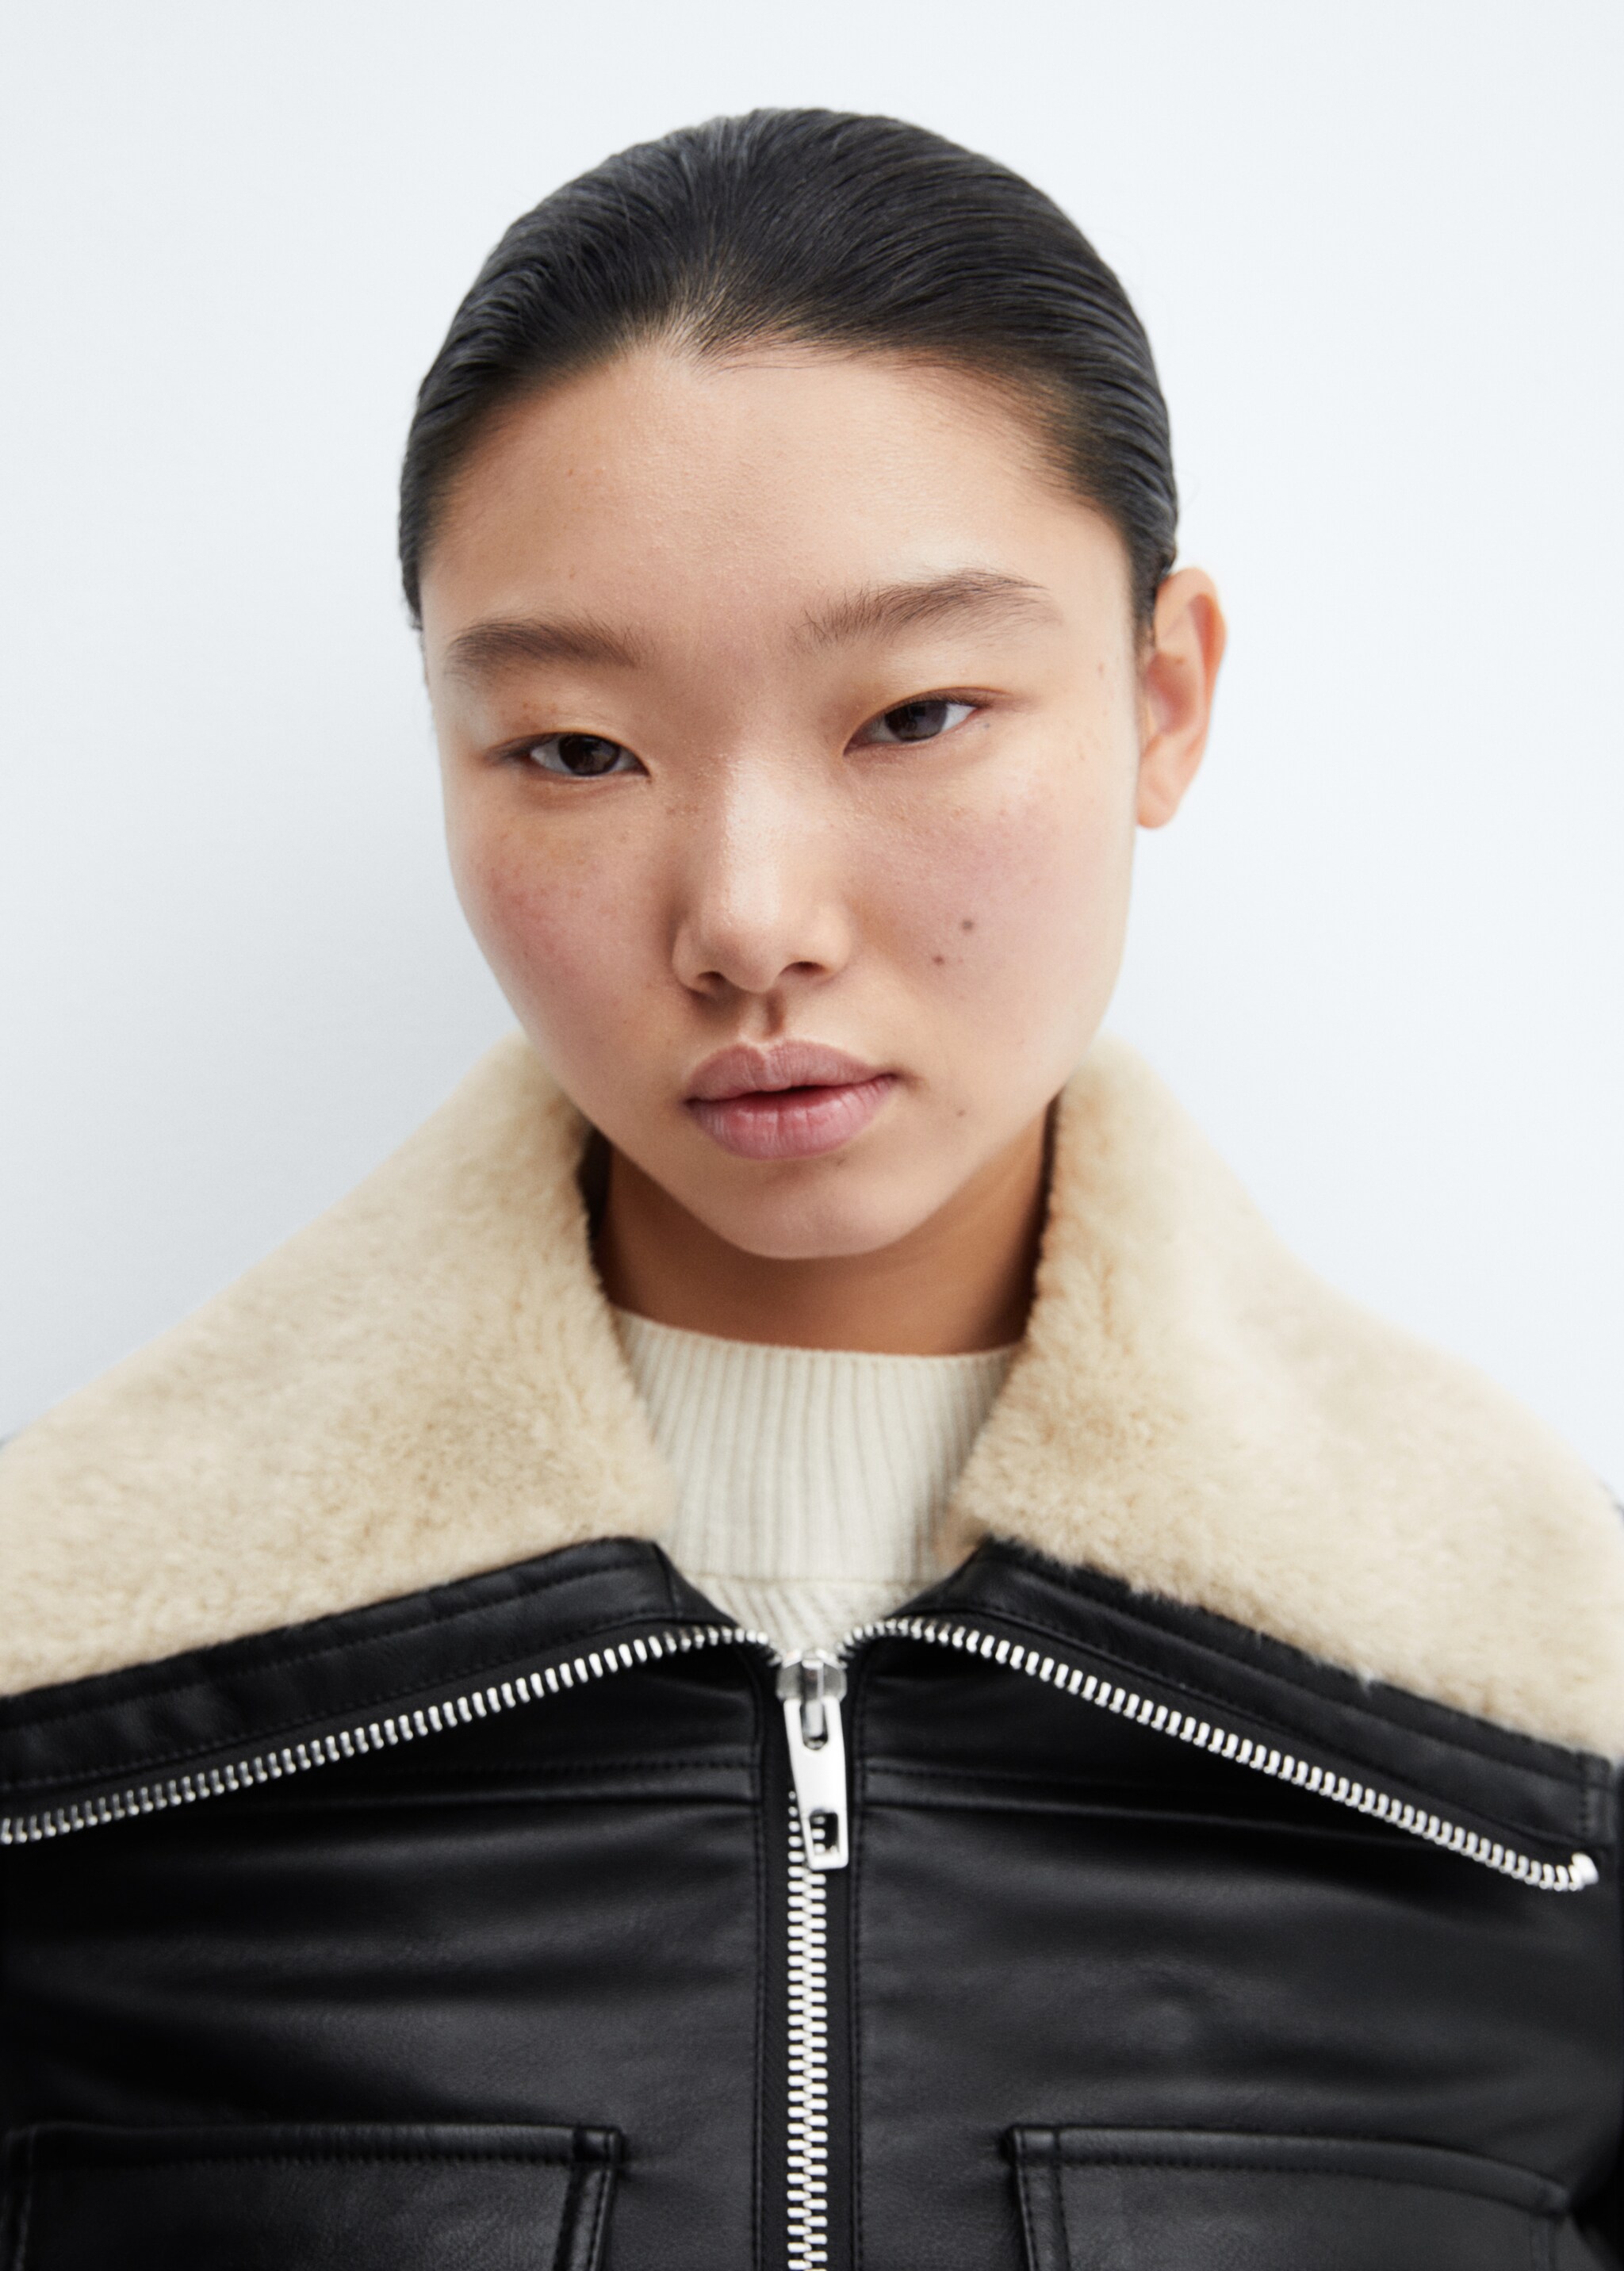 Shearling-lined bomber jacket - Details of the article 1